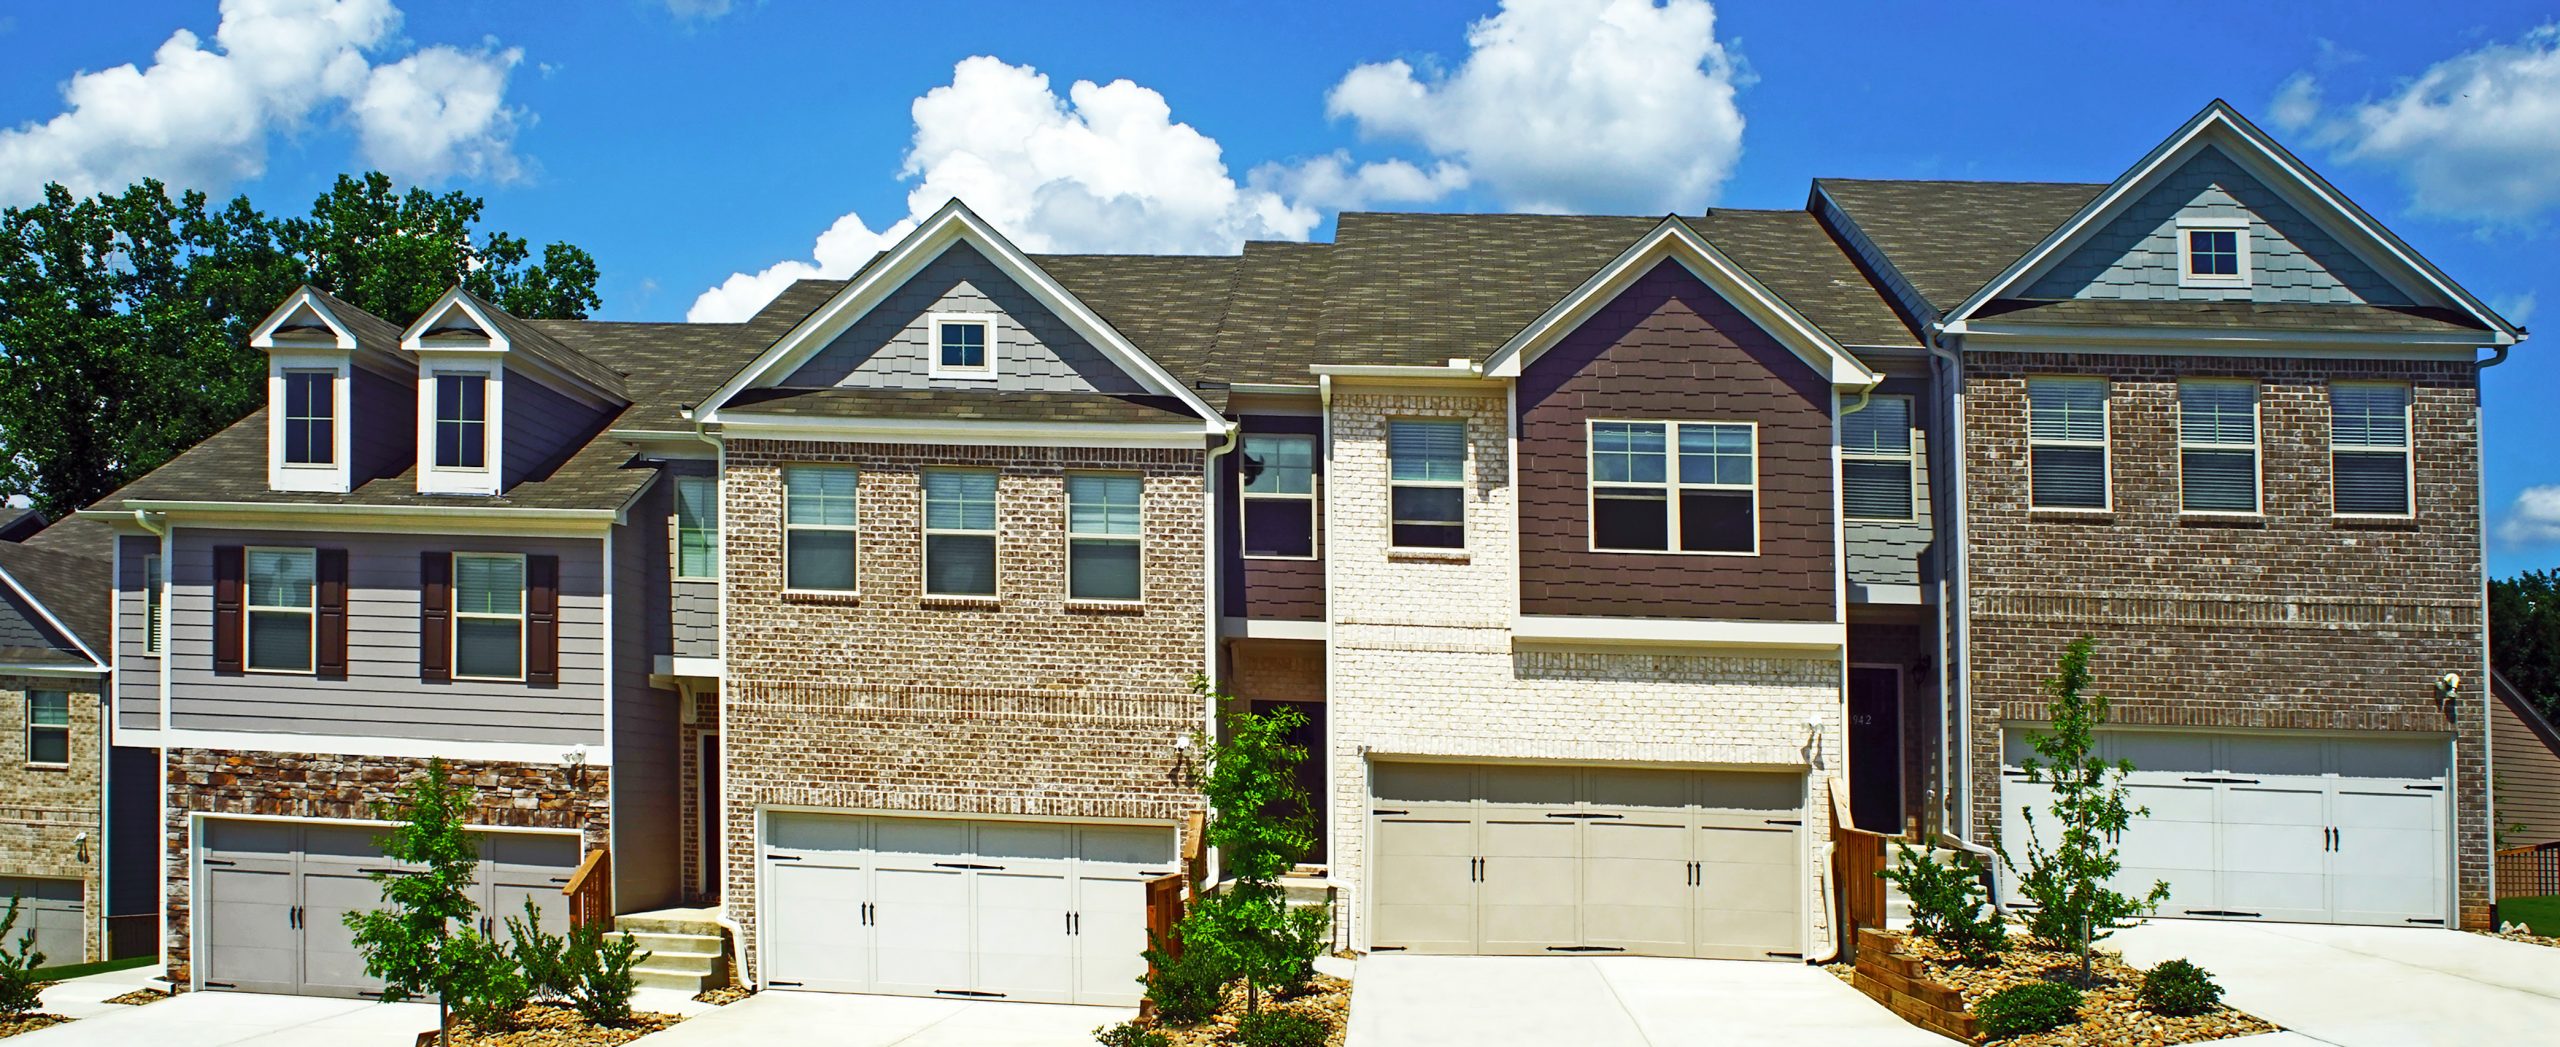 See Ellis Pointe townhomes in Conyers GA, near Stonecrest Mall in Dekalb Co., off I-20.